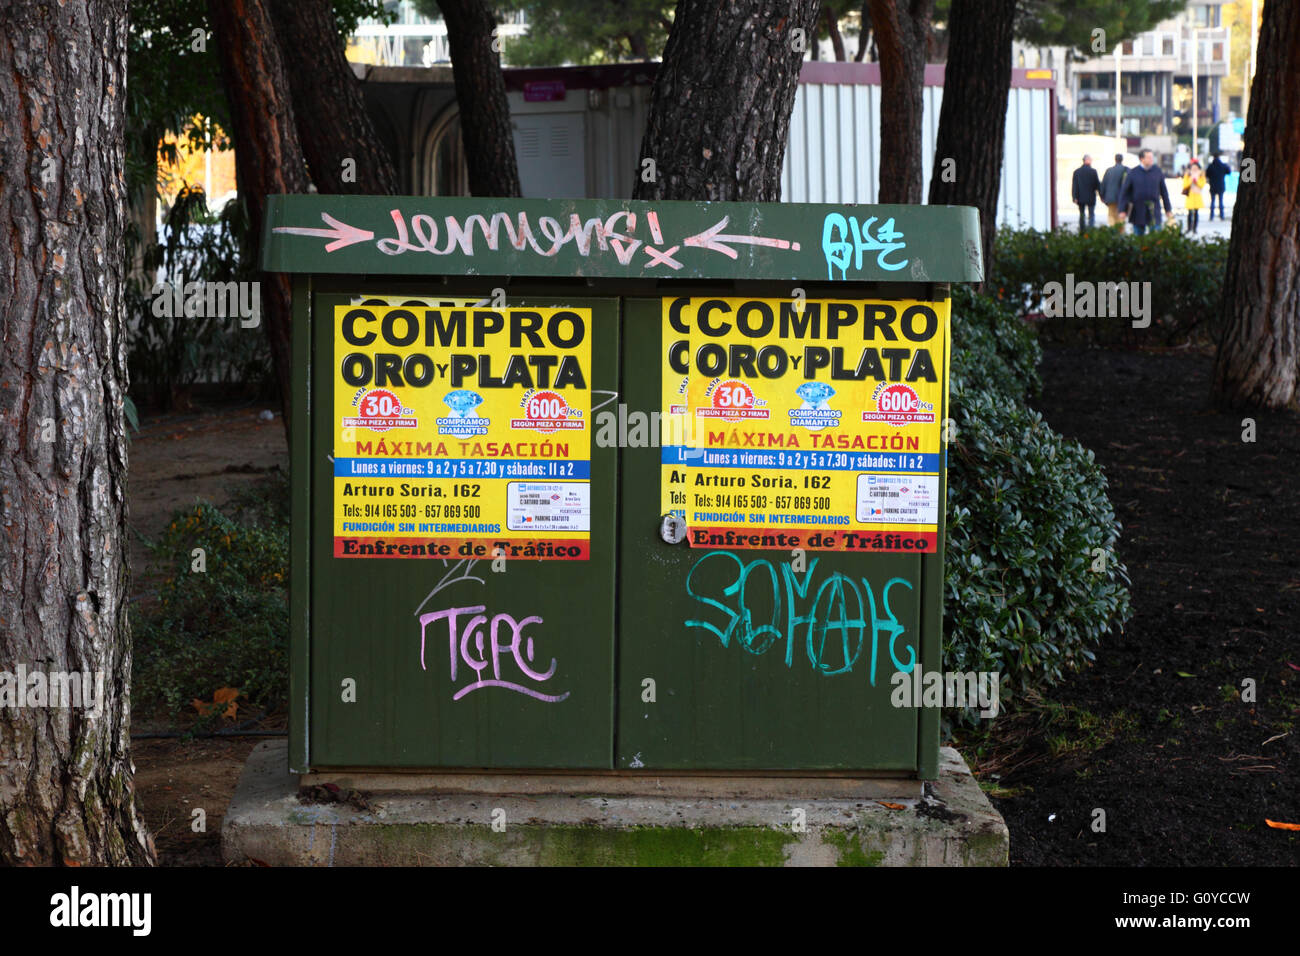 Adverts / posters on electrical enclosure / cabinet for buyer offering to buy gold and silver during economic crisis, Madrid, Spain Stock Photo